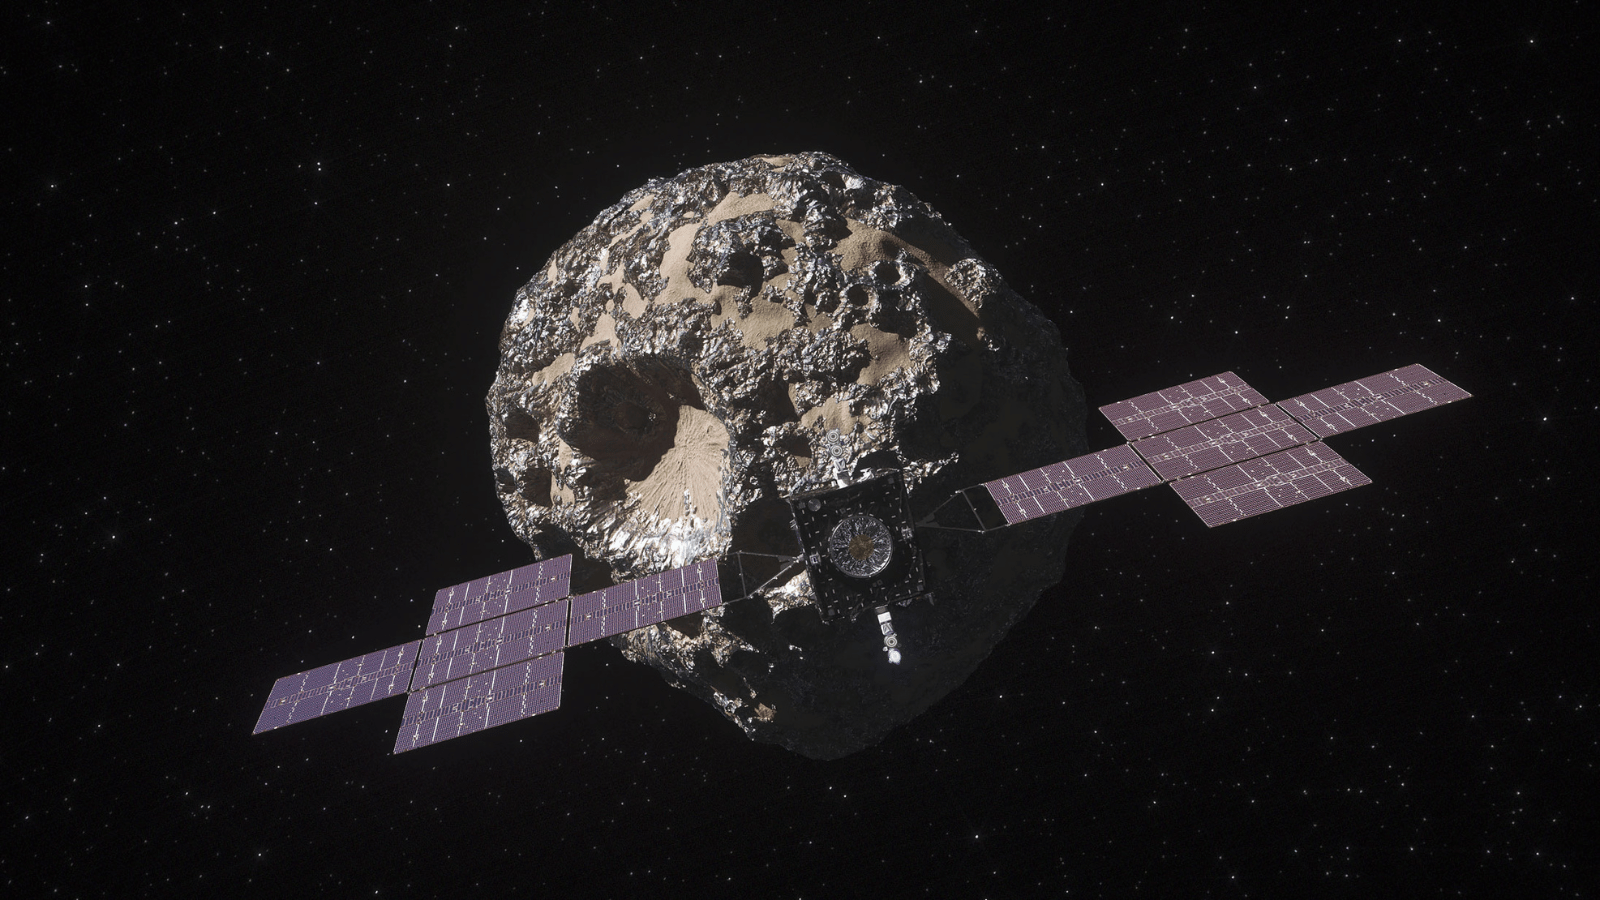 Psyche spacecraft at the Asteroid Psyche (Illustration)